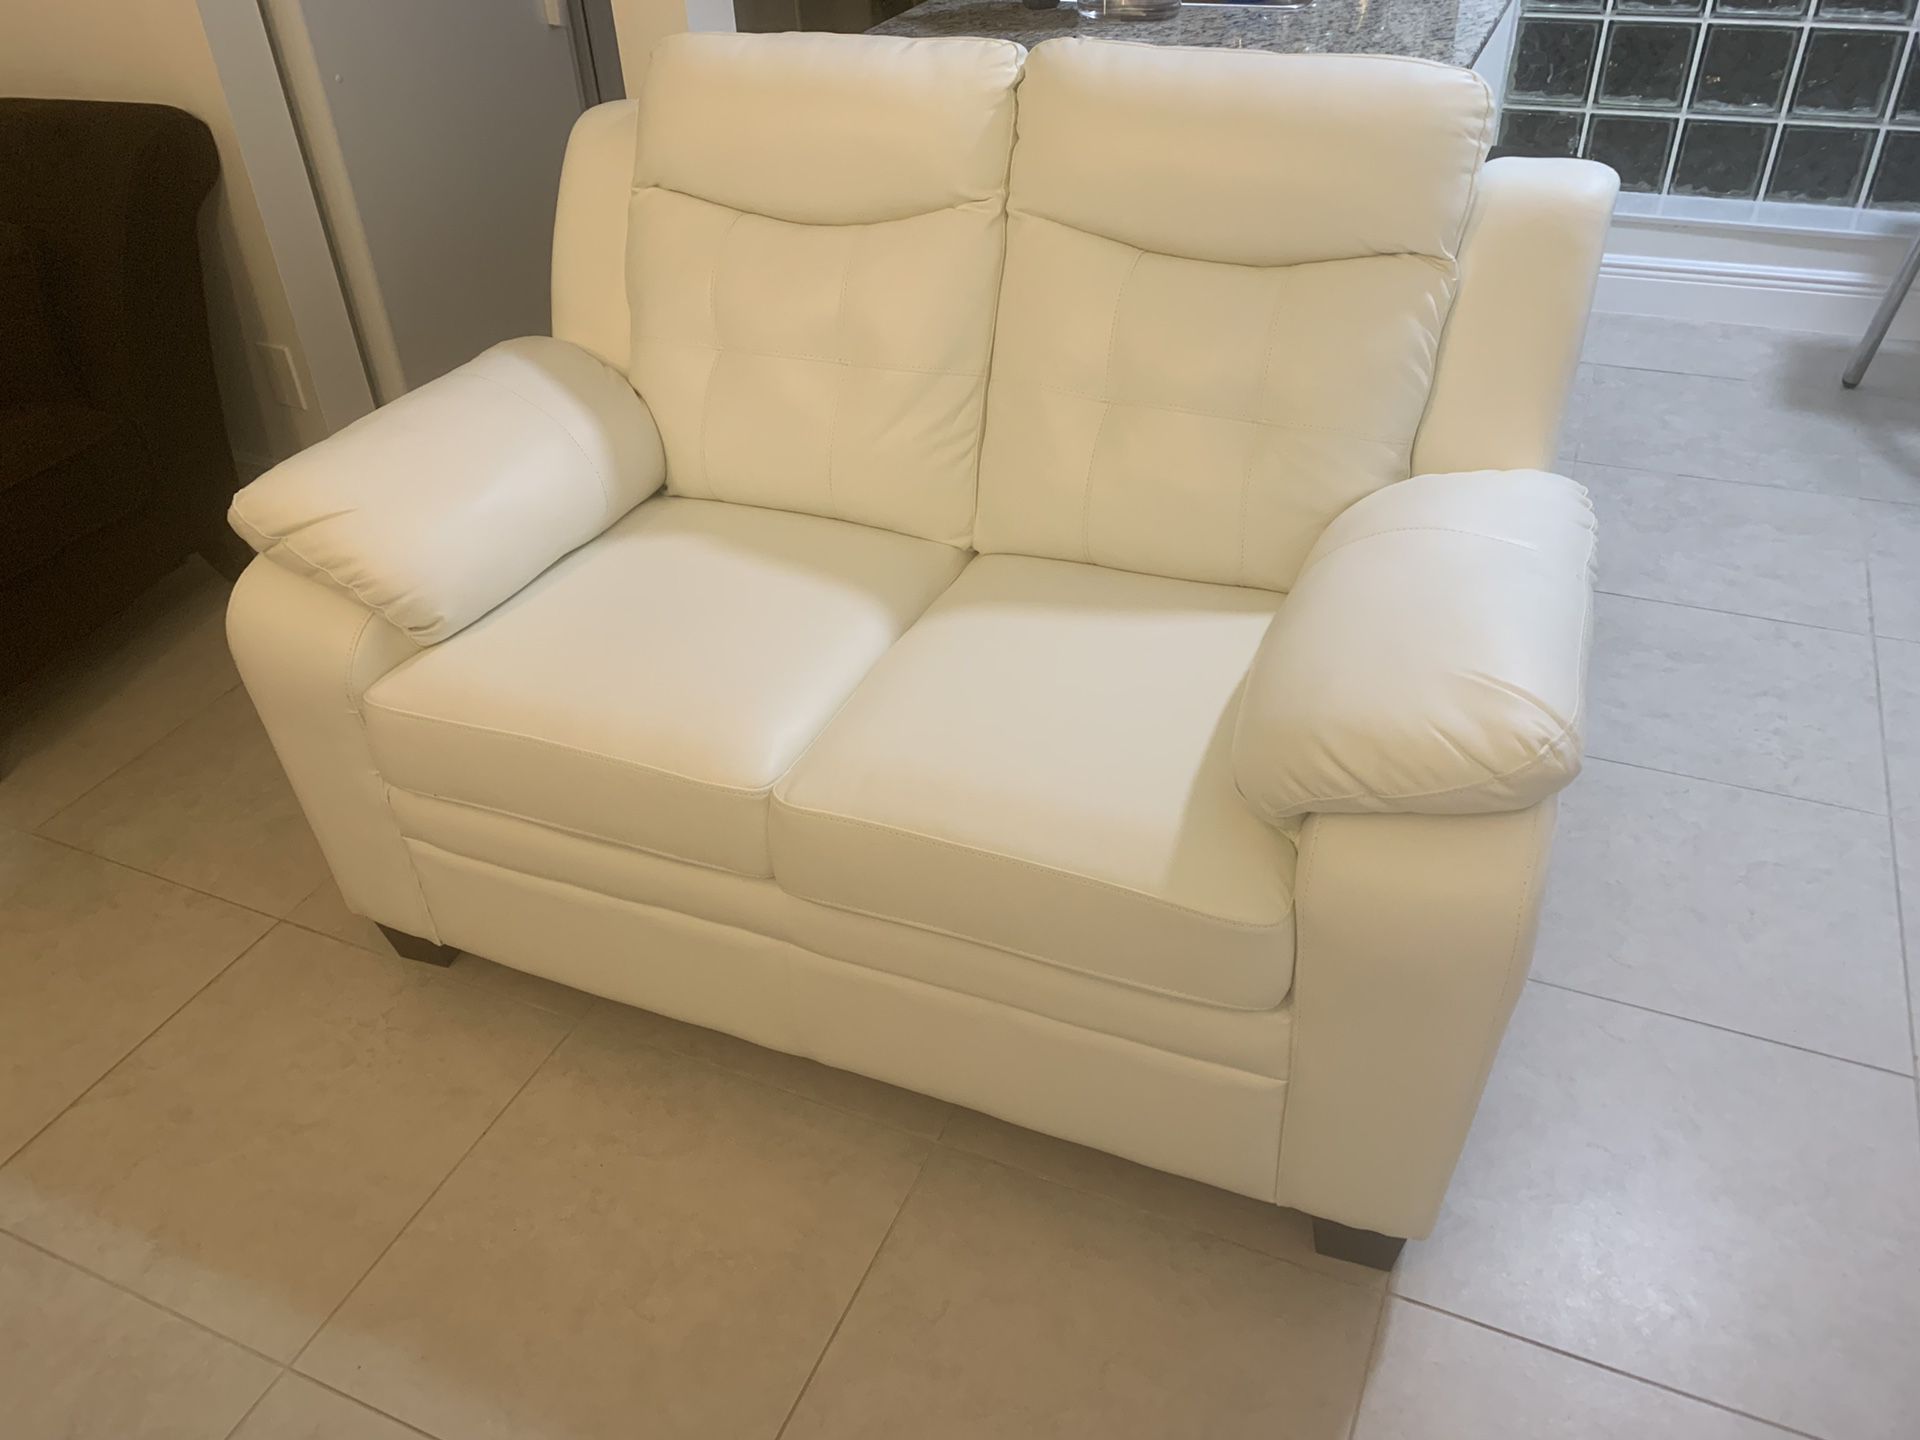 Brand new White leather couch with Purchase Receipt 6 months ago